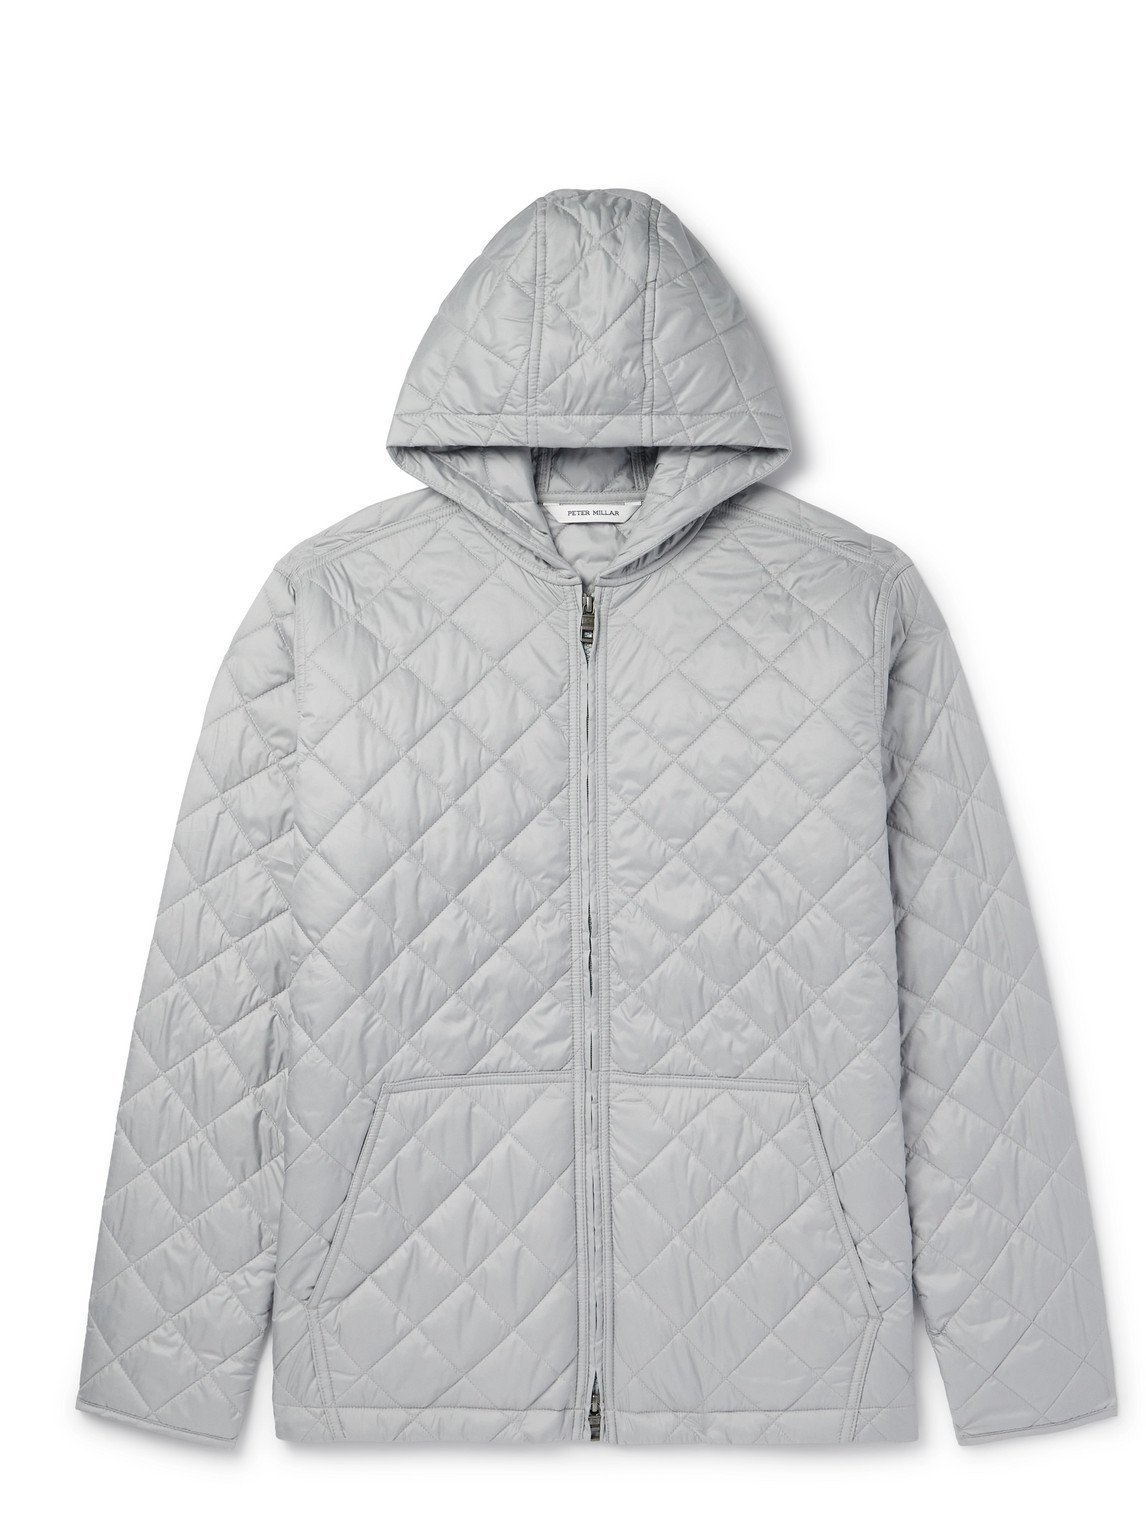 Essex Quilted Shell Jacket